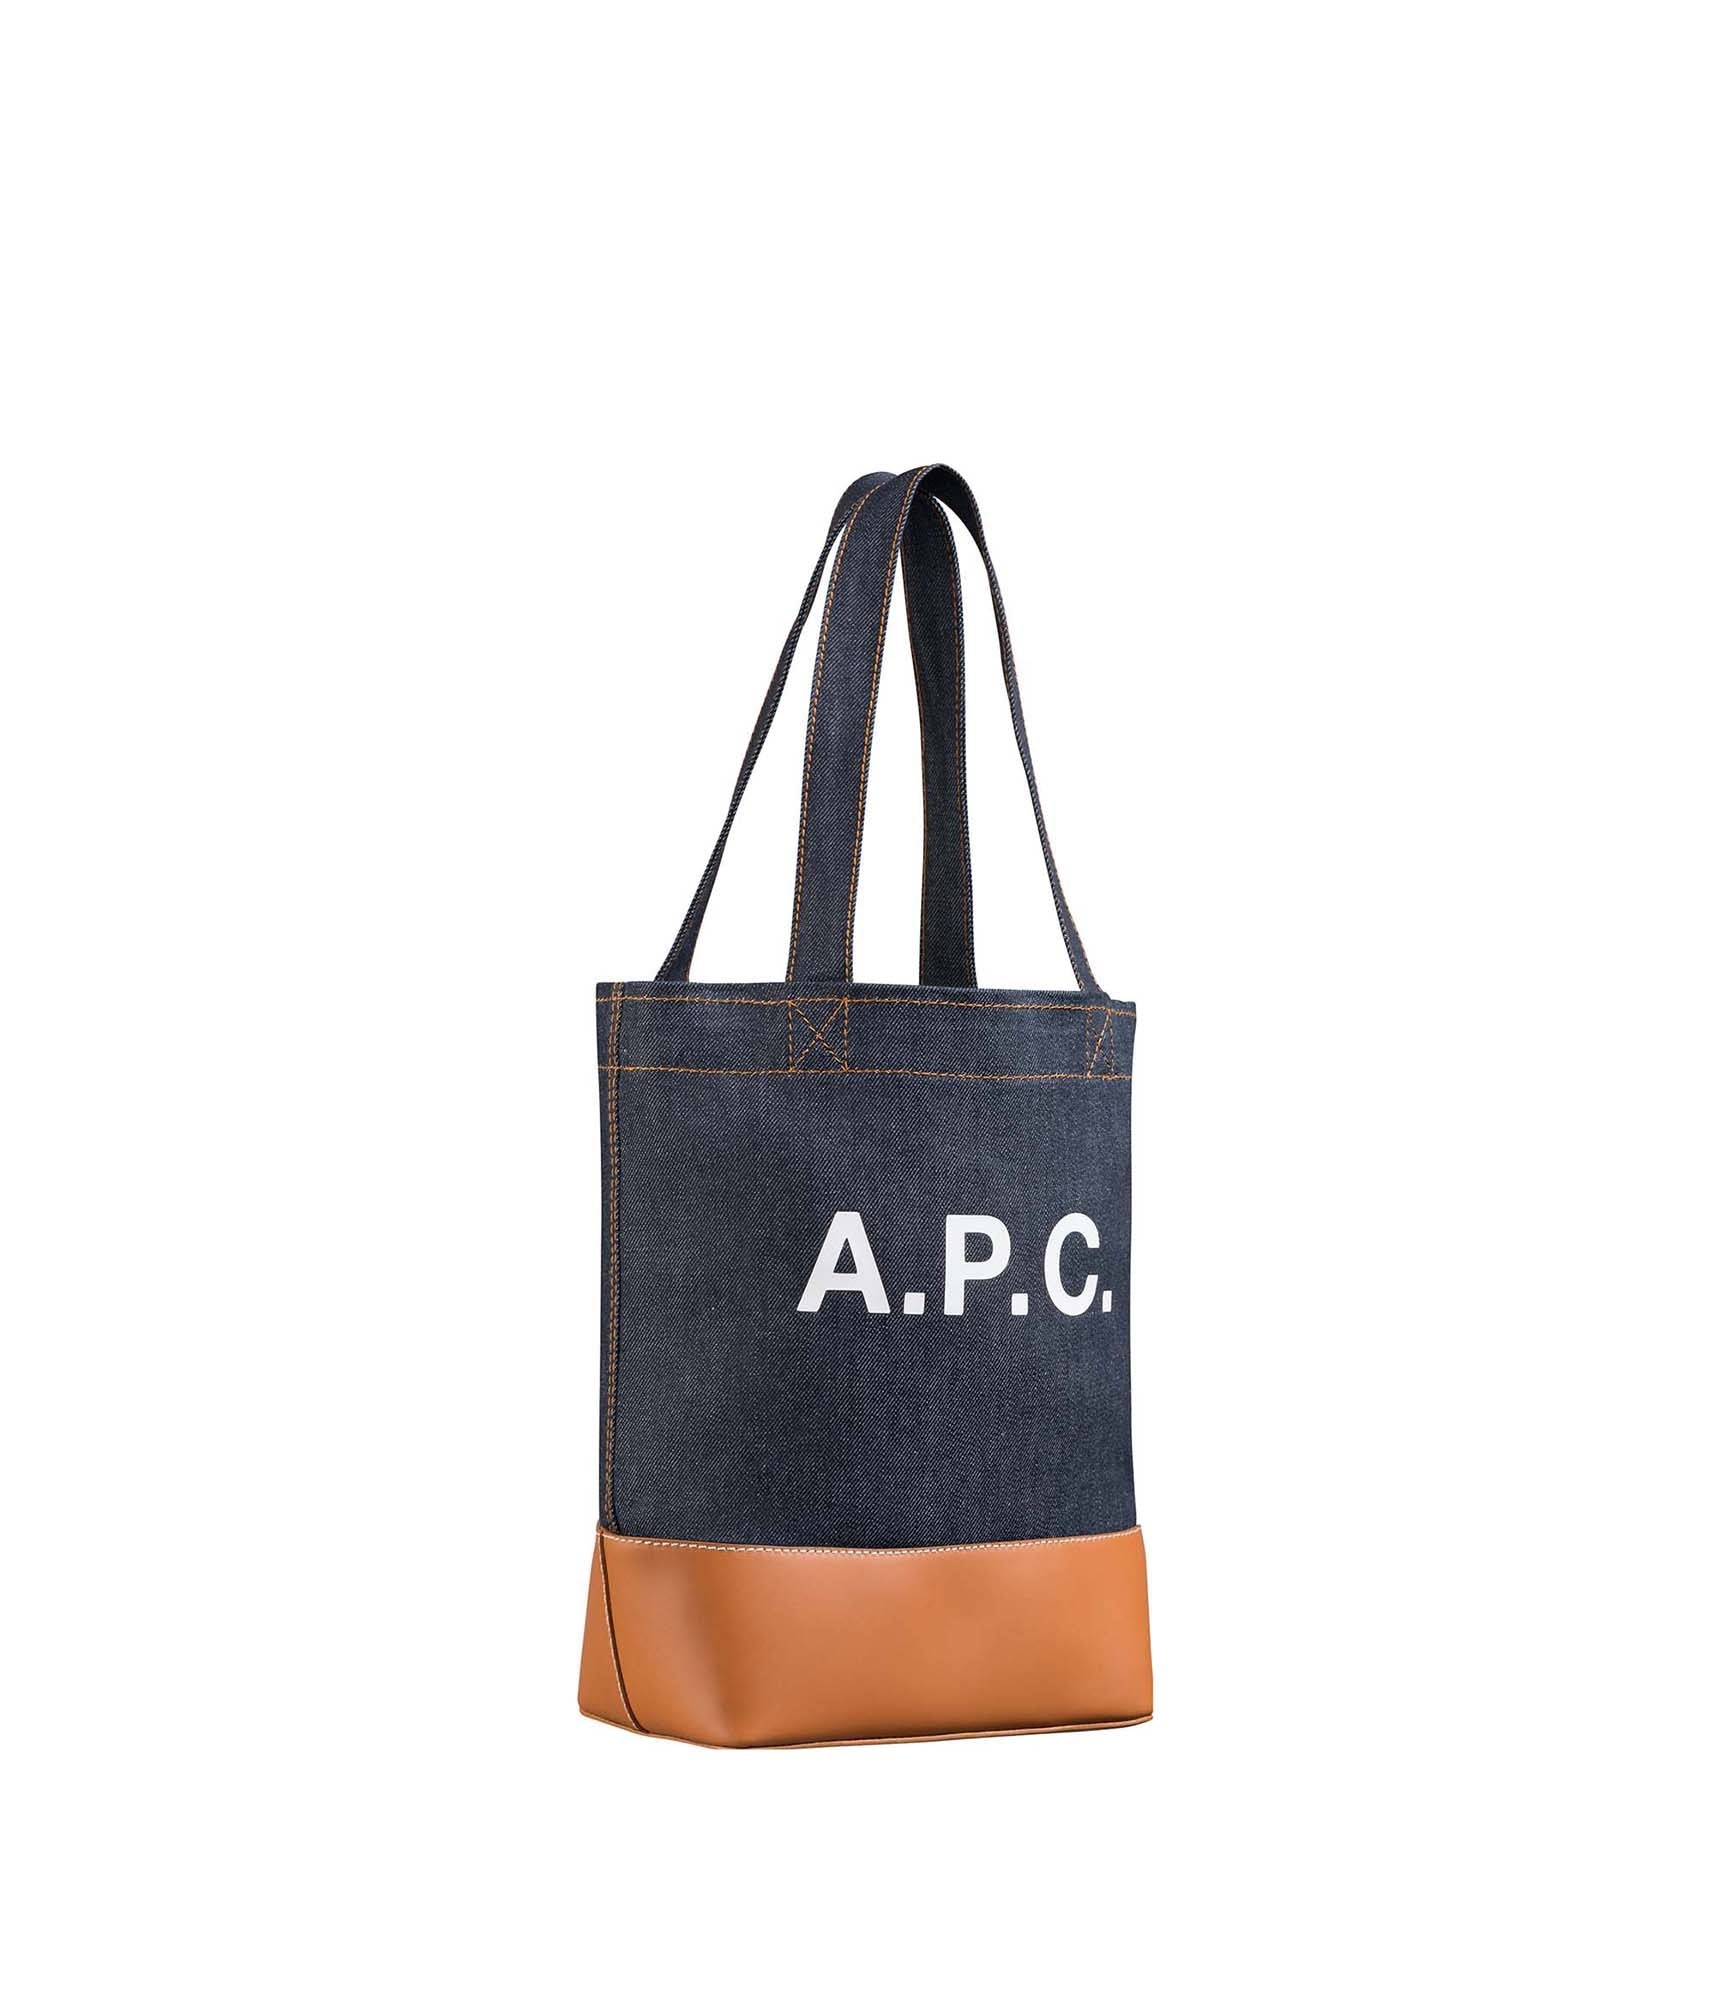 logo-embroidered corduroy tote bag, A.P.C.